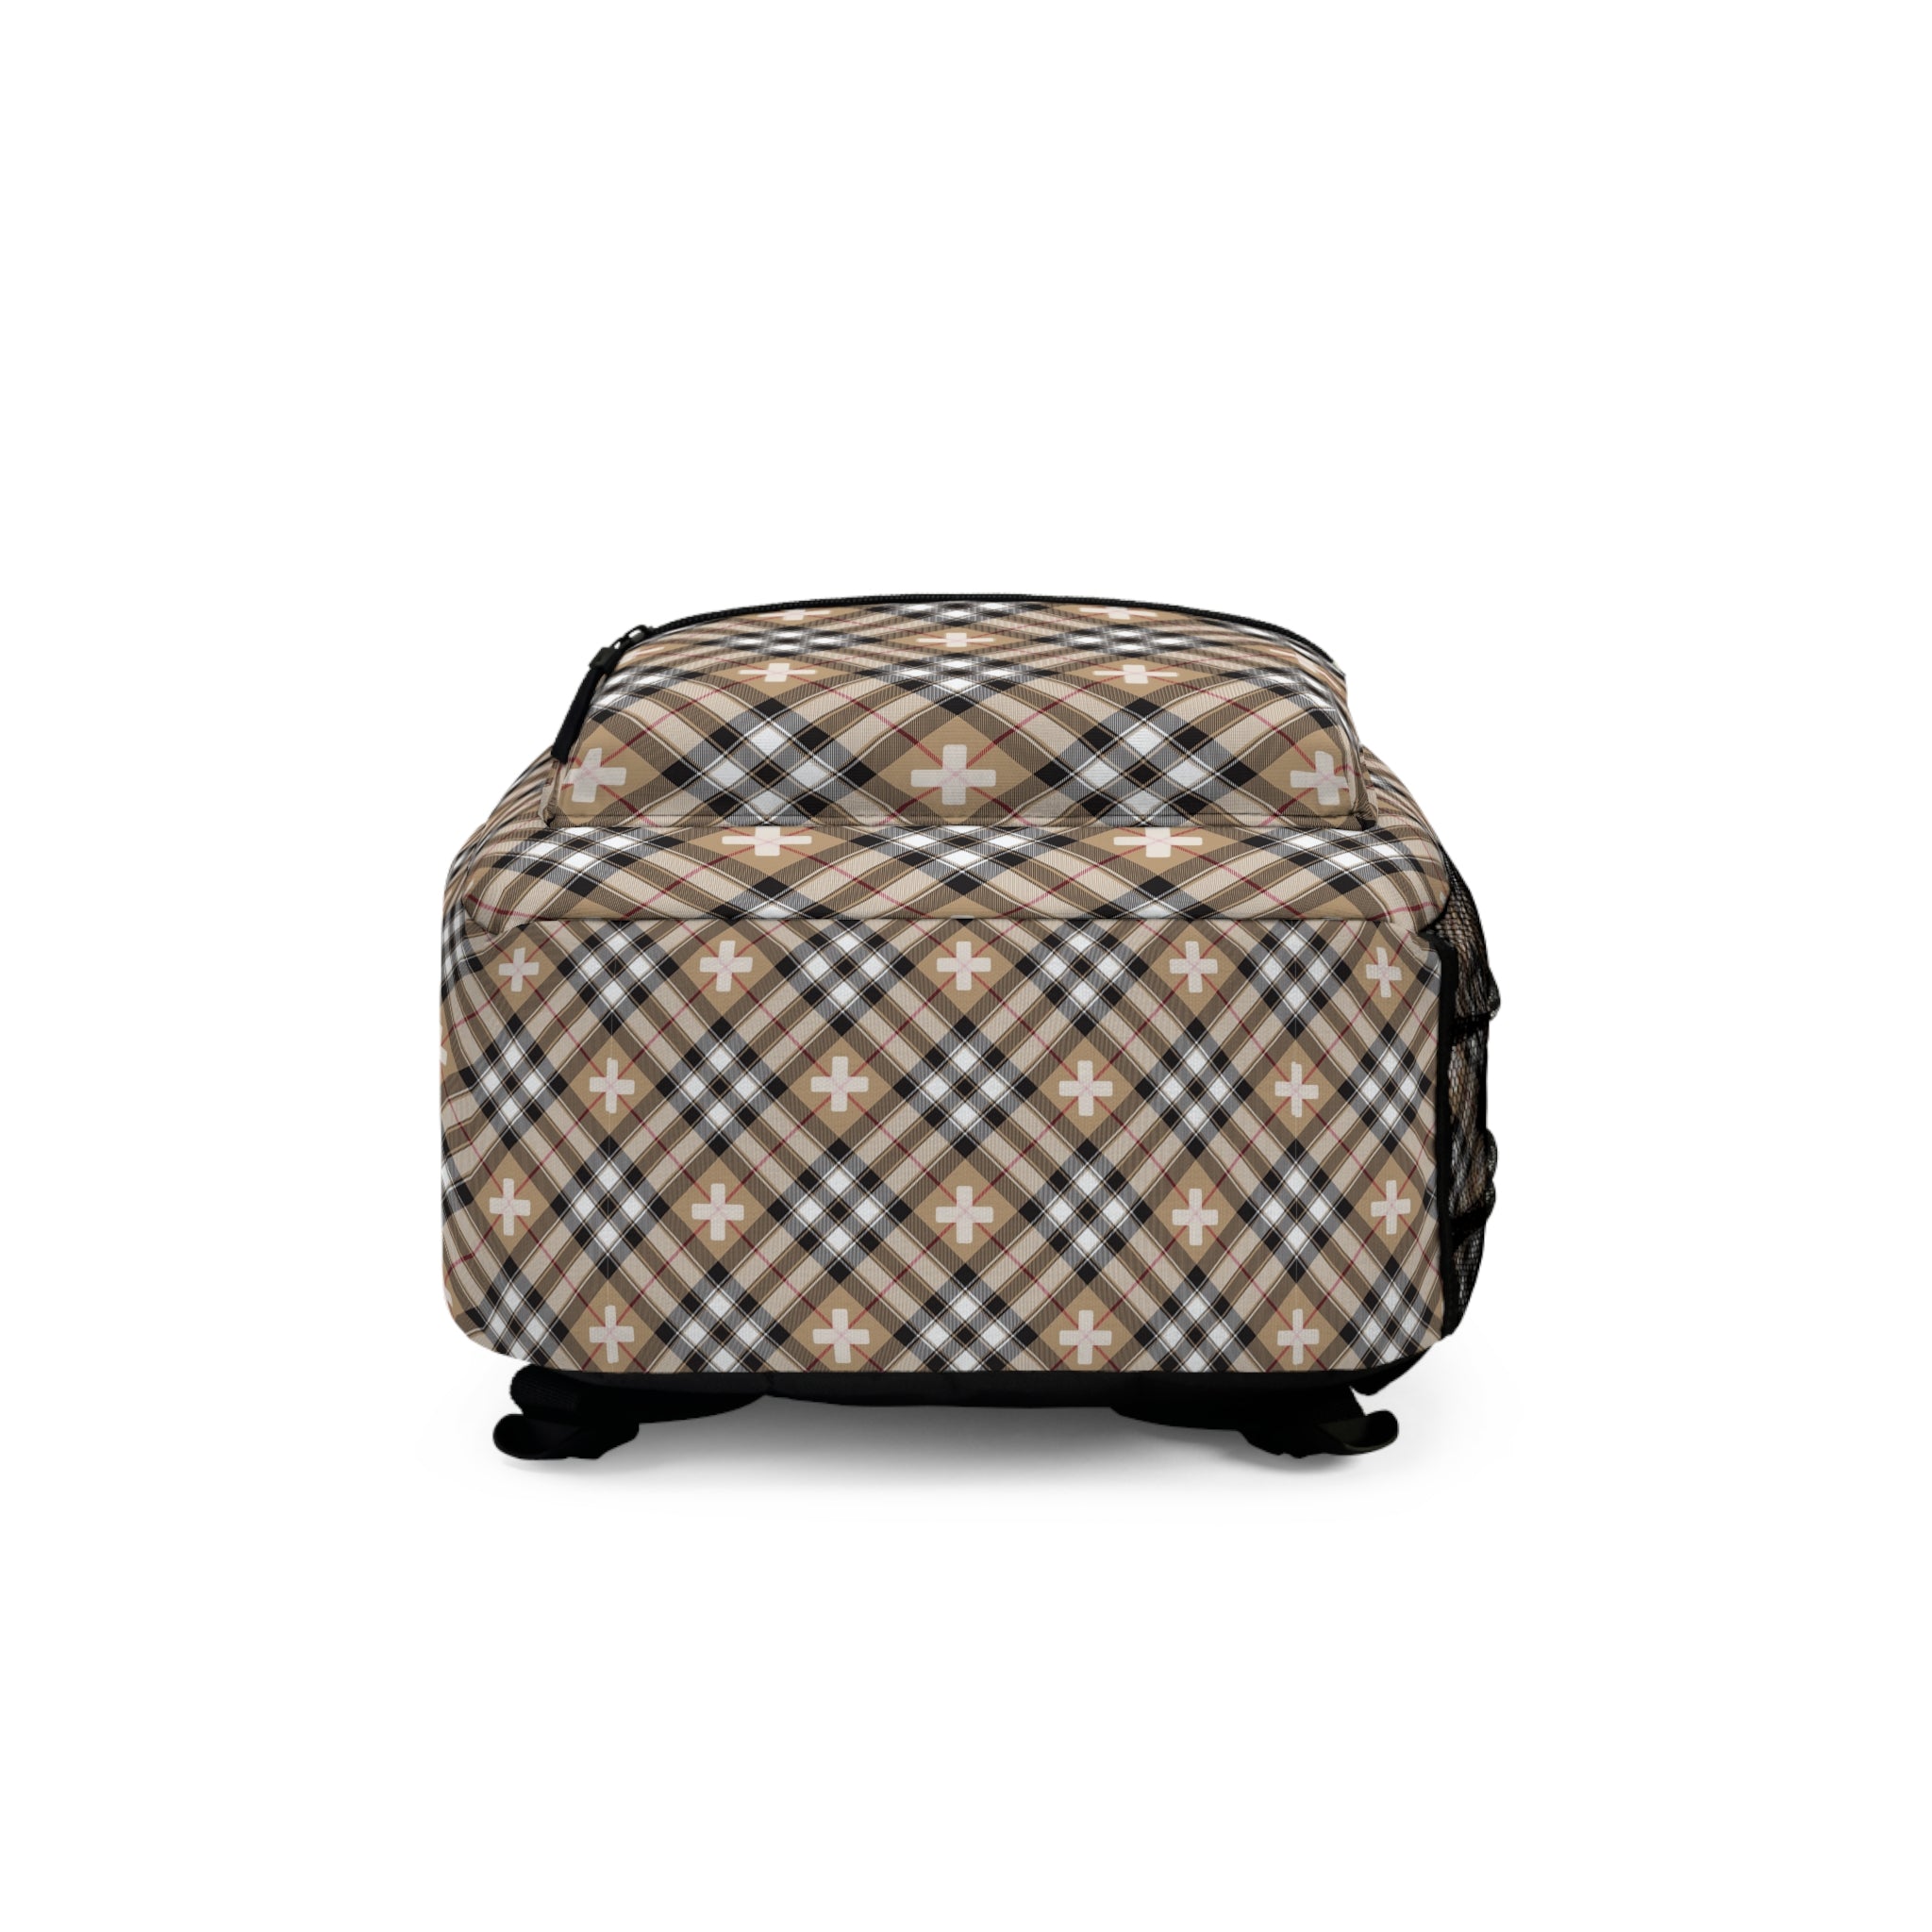 Abby Beige Pattern "Plus Sign" Backpack, Unisex Plaid Backpack